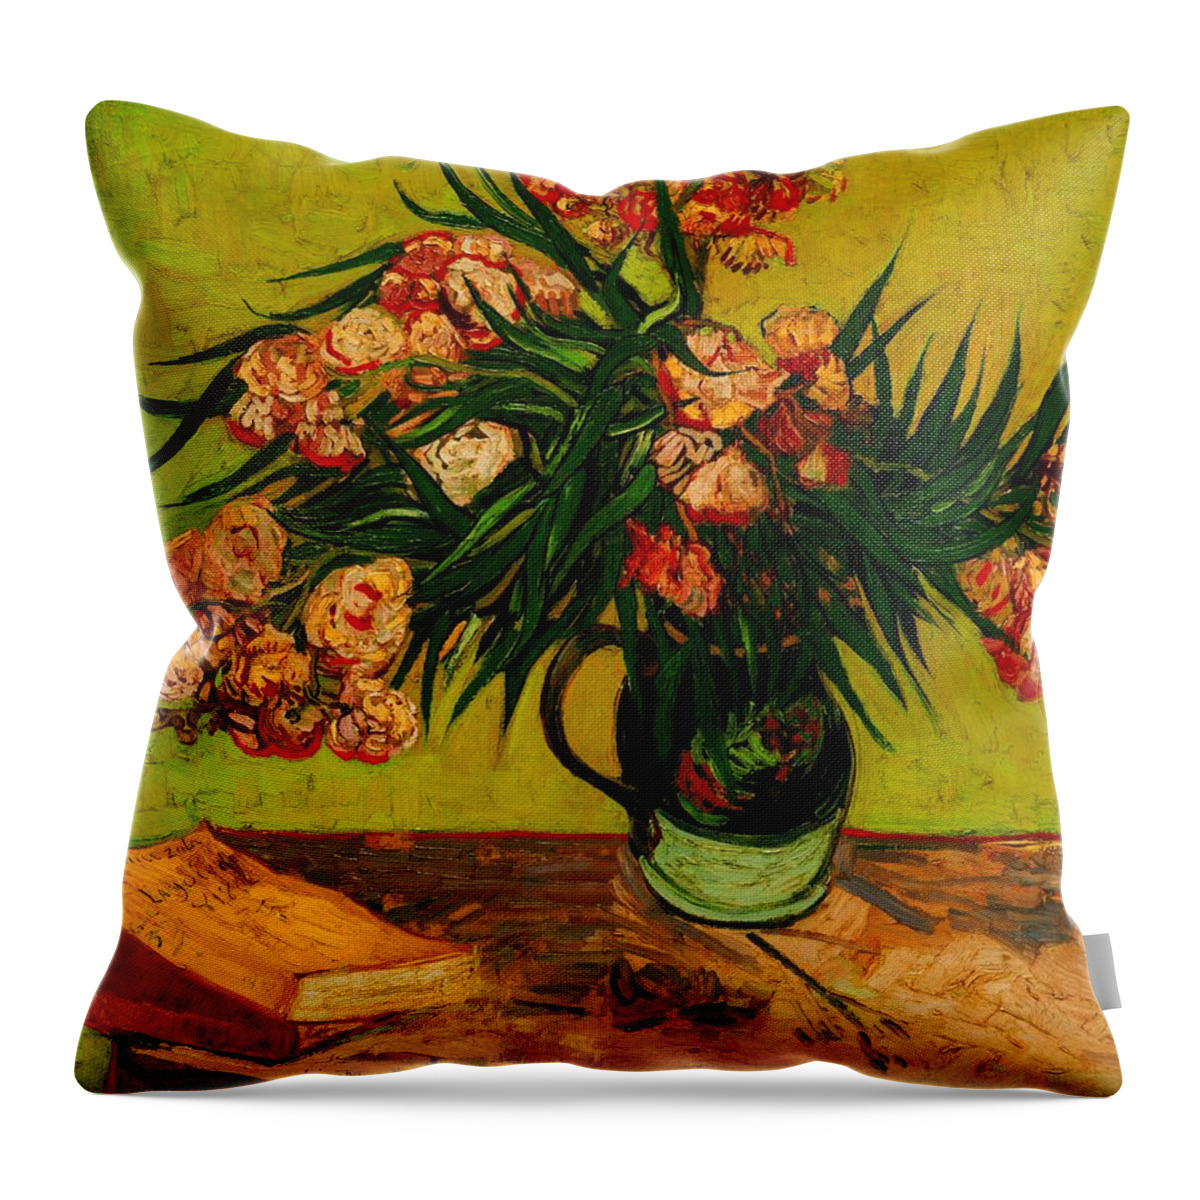 Flowers Throw Pillow featuring the painting Vase With Oleanders And Books by Vincent Van Gogh